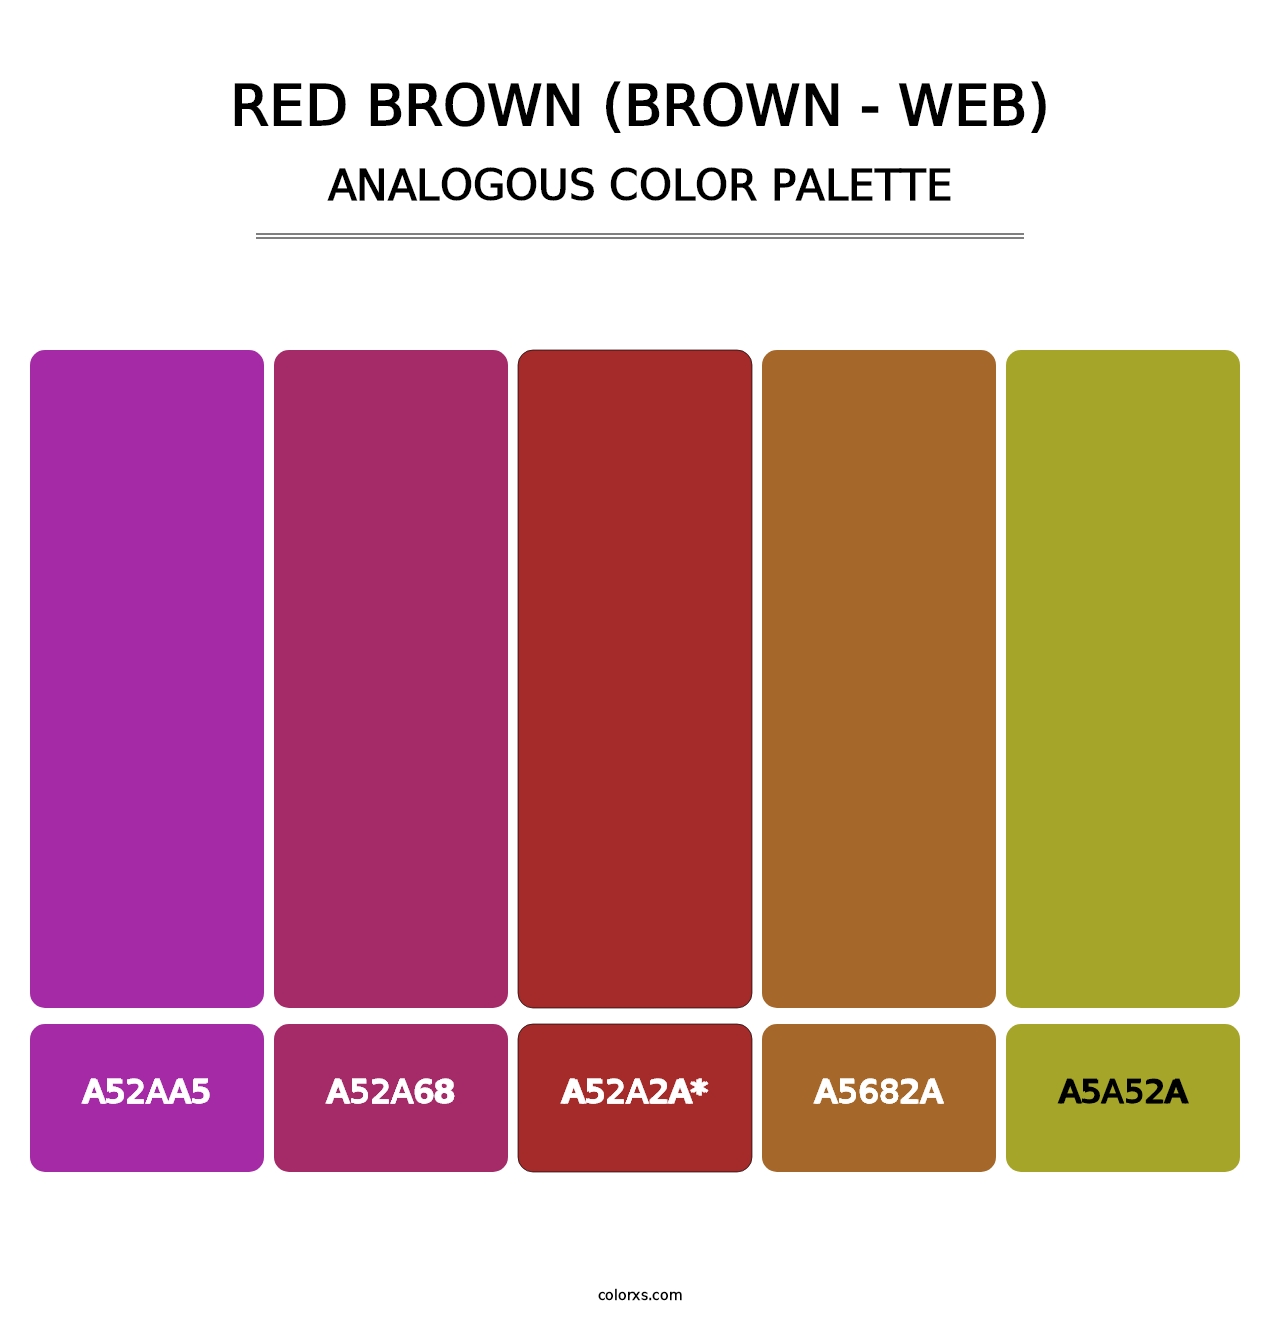 Red Brown (Brown - Web) - Analogous Color Palette